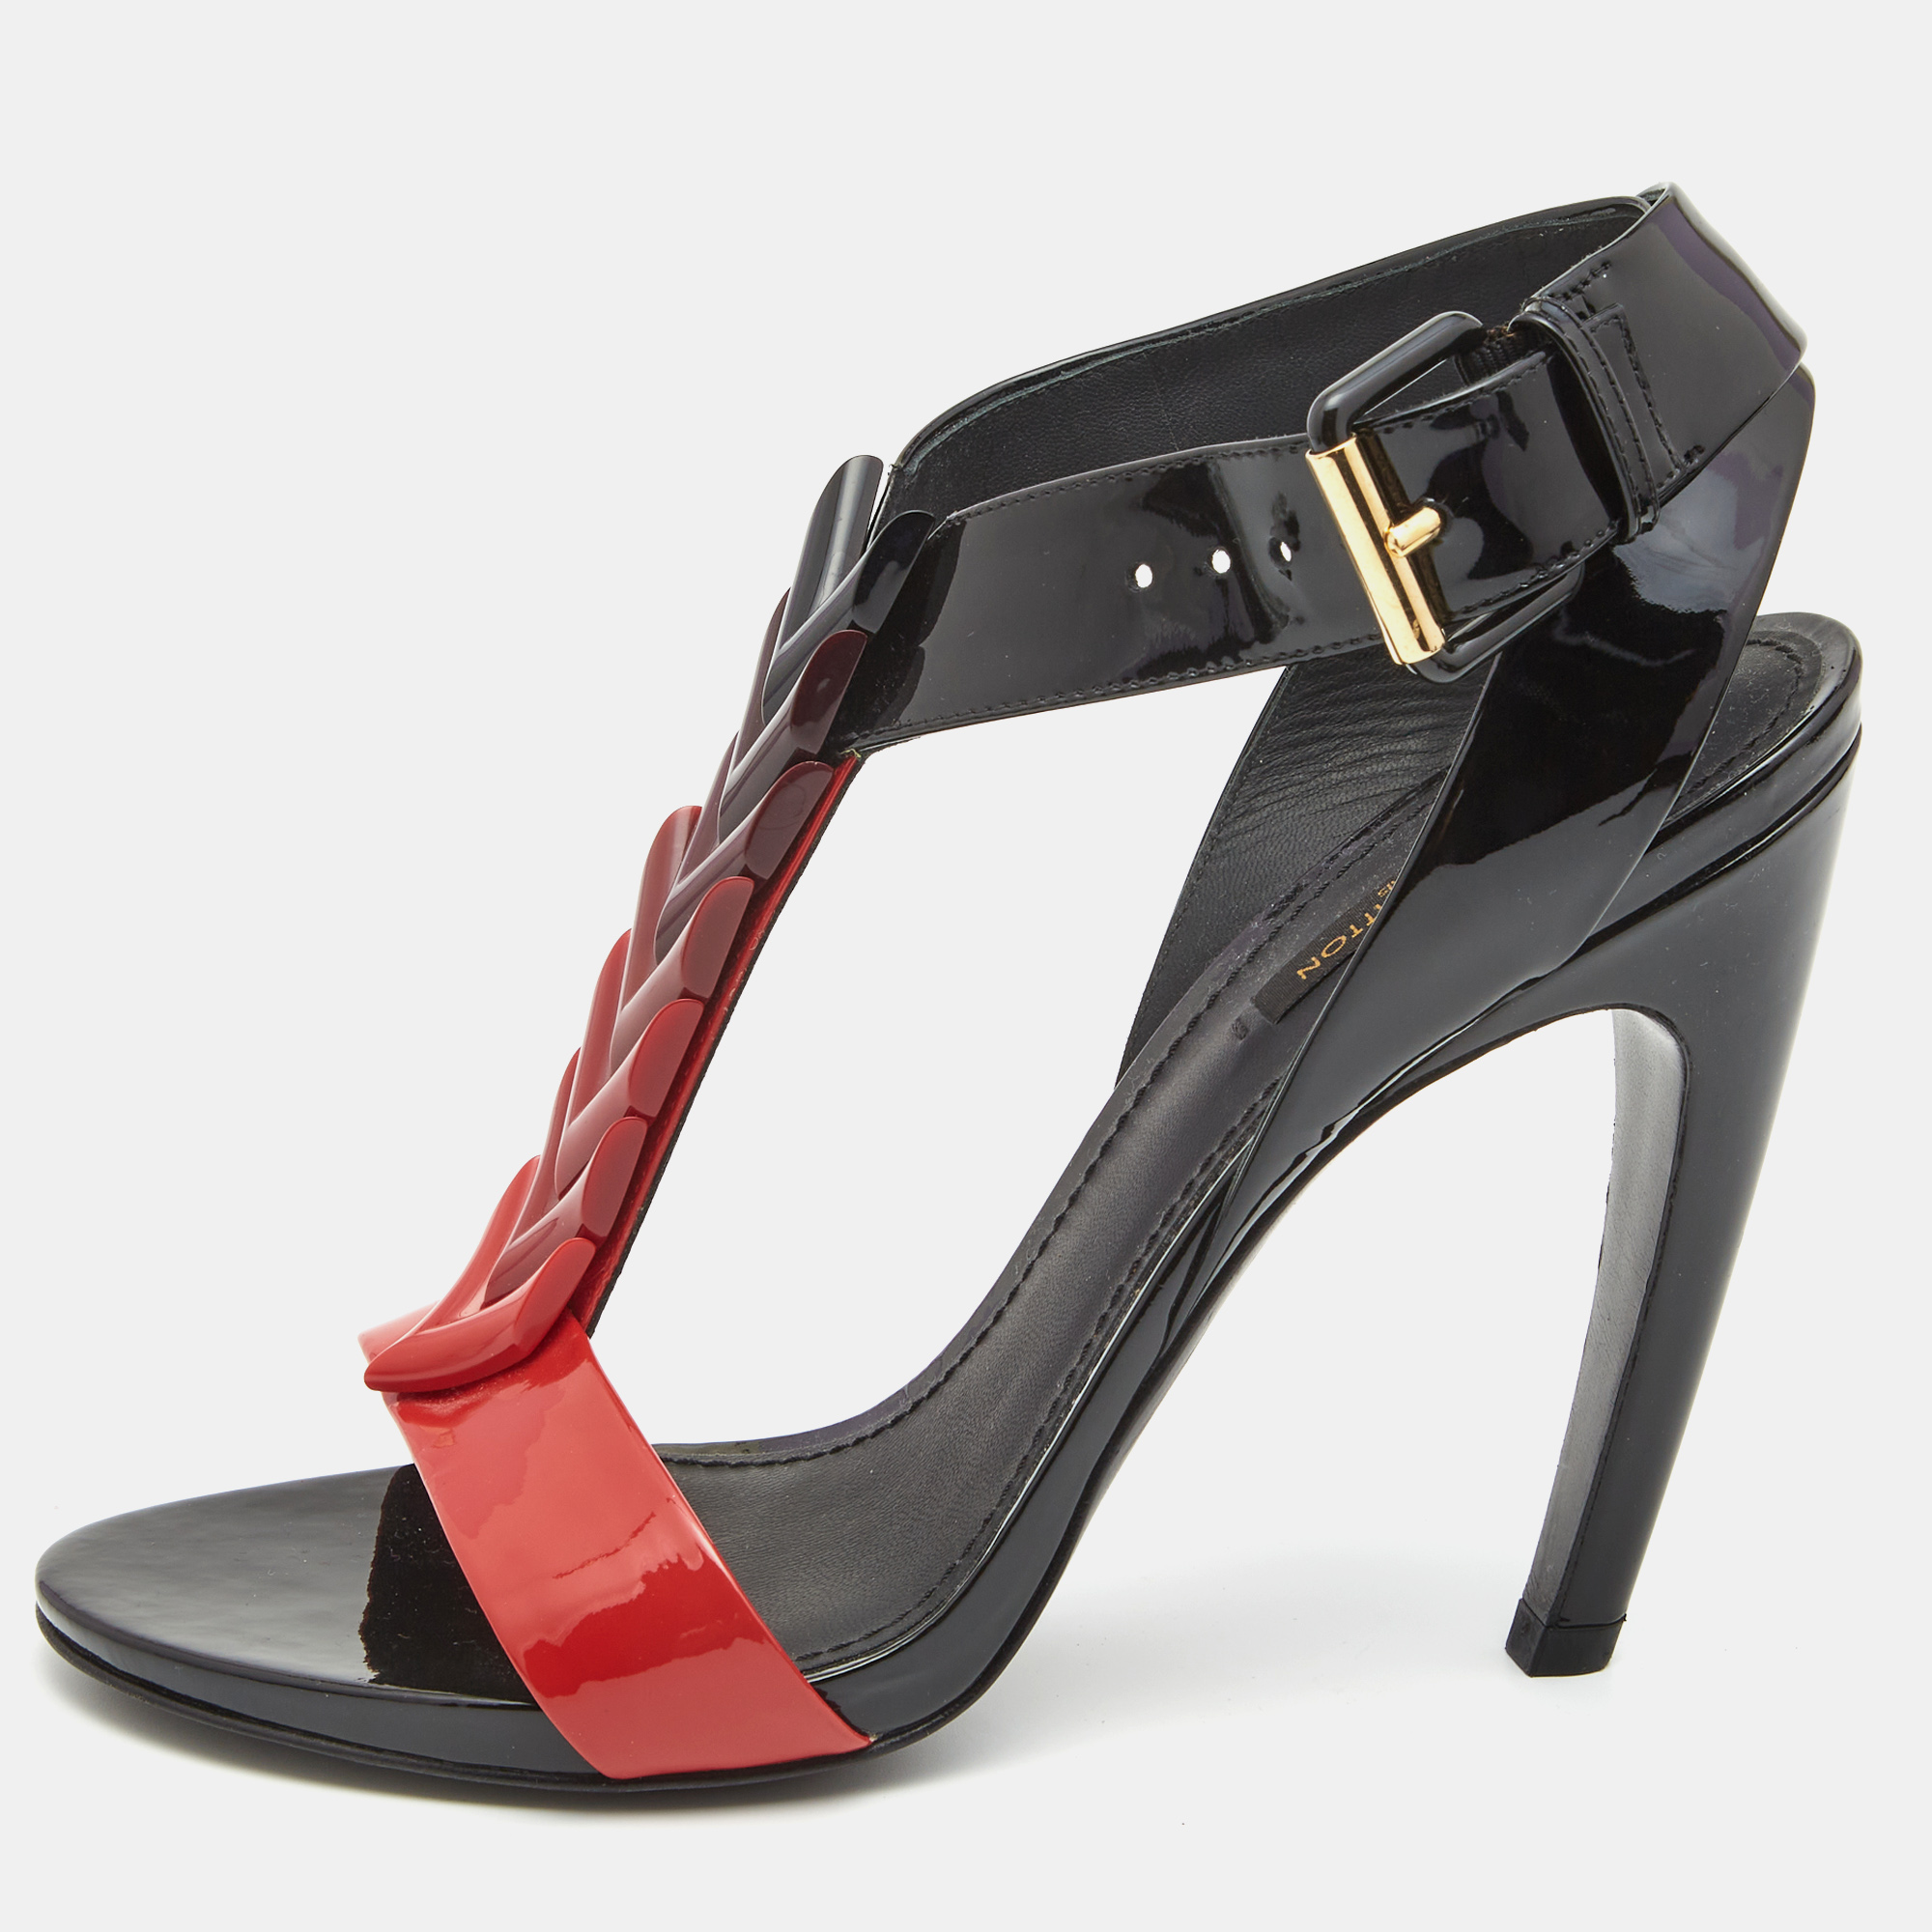 Louis Vuitton - Authenticated Pokerface Sandal - Patent Leather Black Plain for Women, Very Good Condition